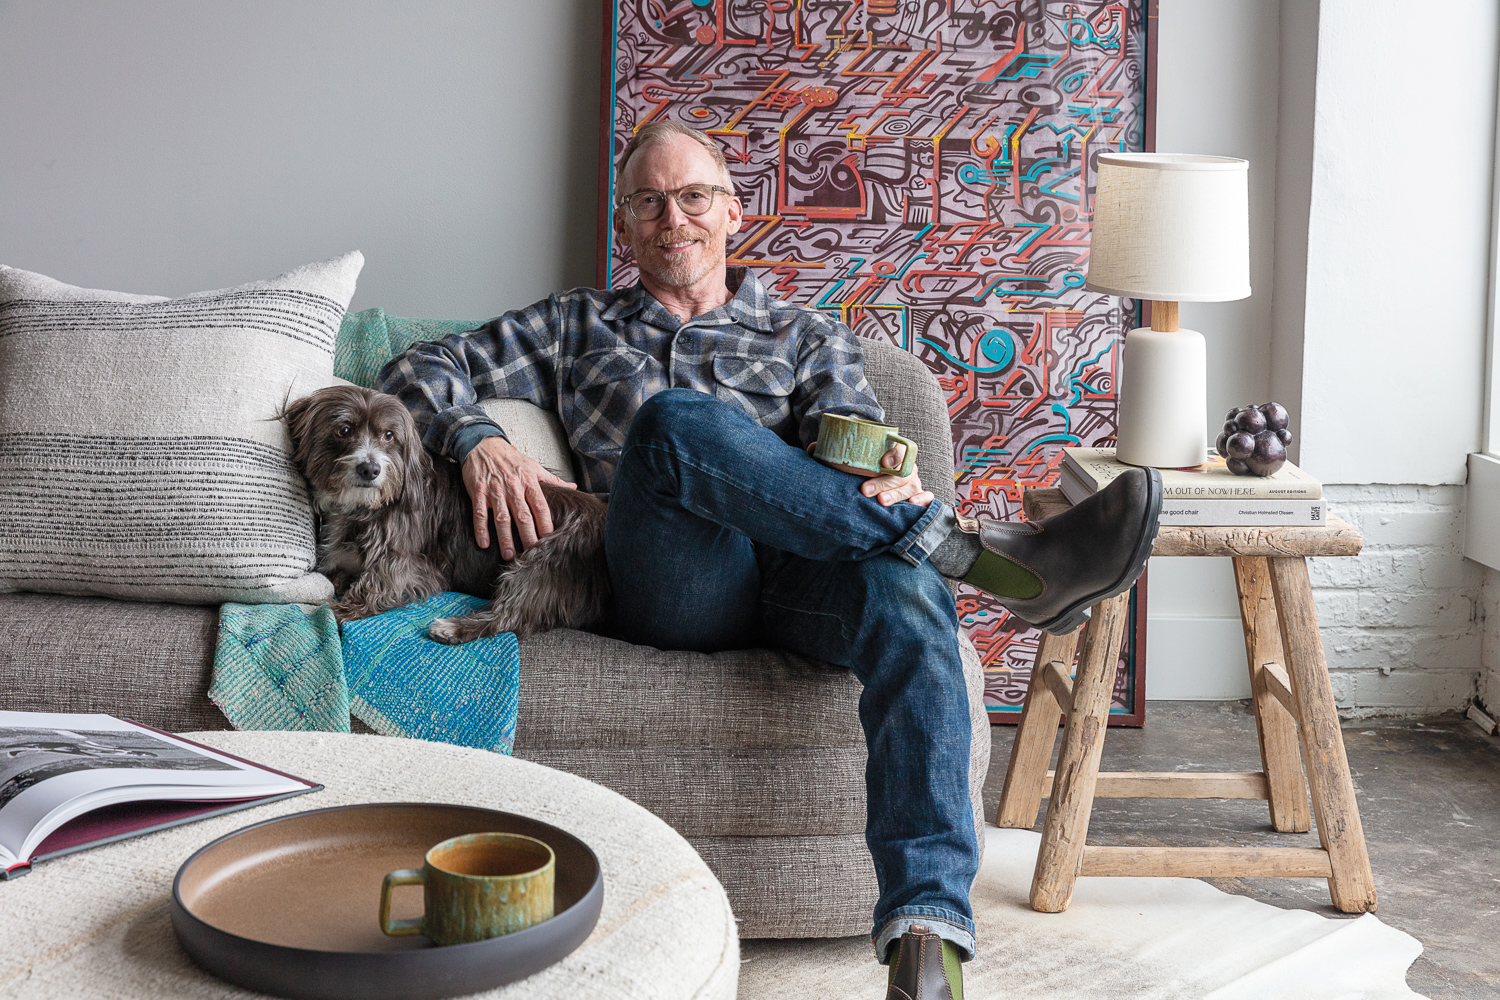 Designer Tim Pfeiffer sitting on a gray sofa with a small gray dog.